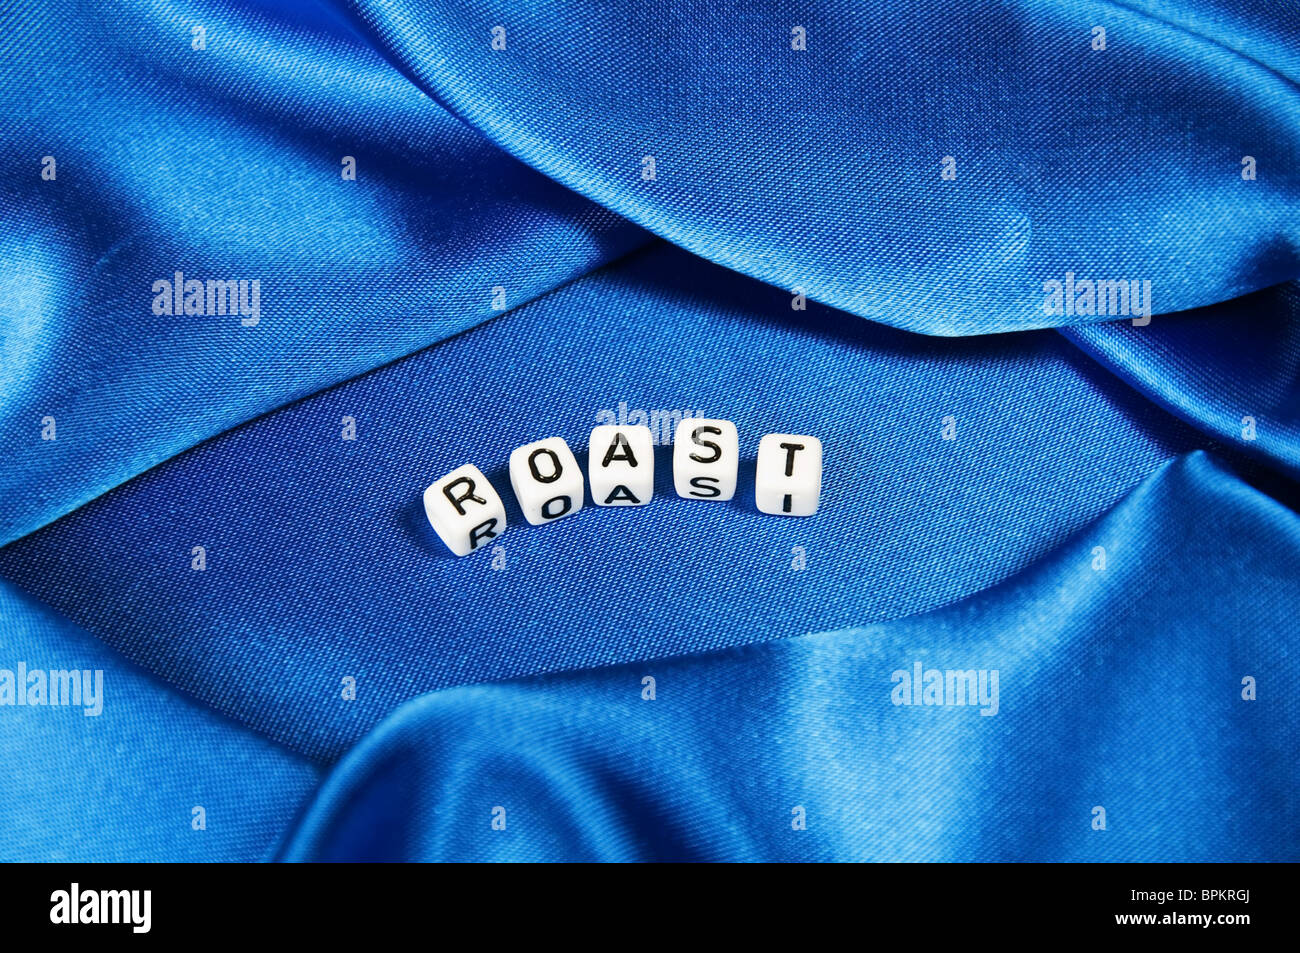 Royal blue satin background with rich folds and wrinkles  is the word roast in black and white cube lettering in this series Stock Photo